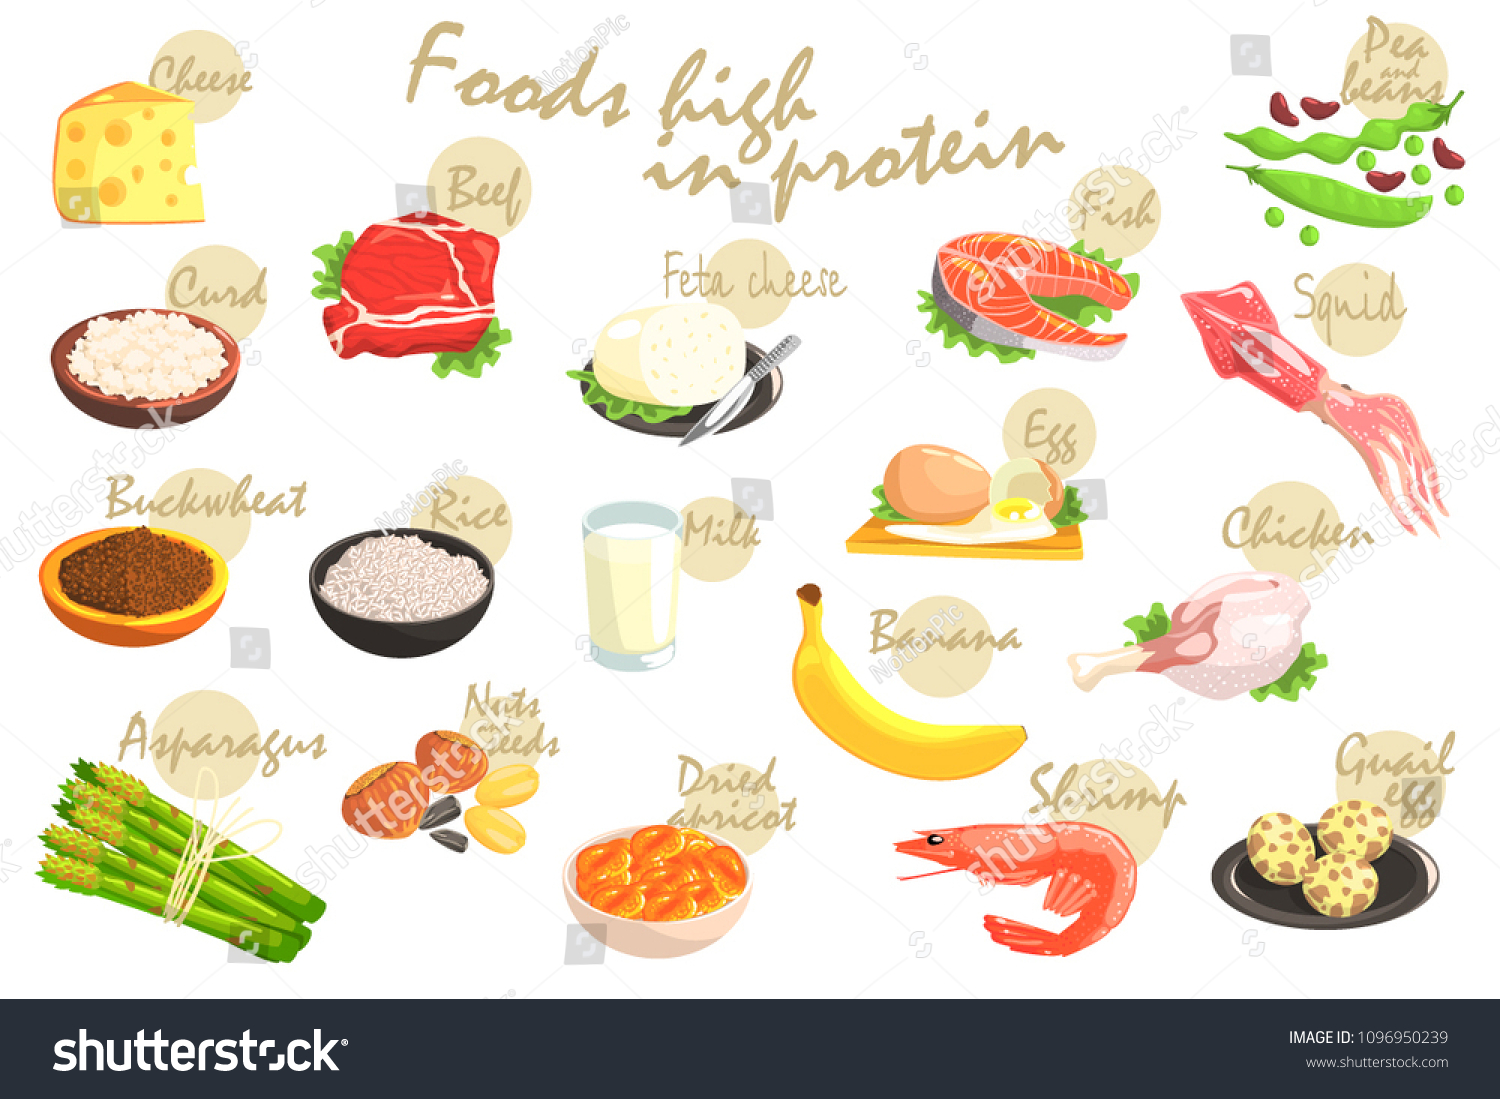 Food Rich Proteins Poster Stock Vector Royalty Free 1096950239 Shutterstock 7605